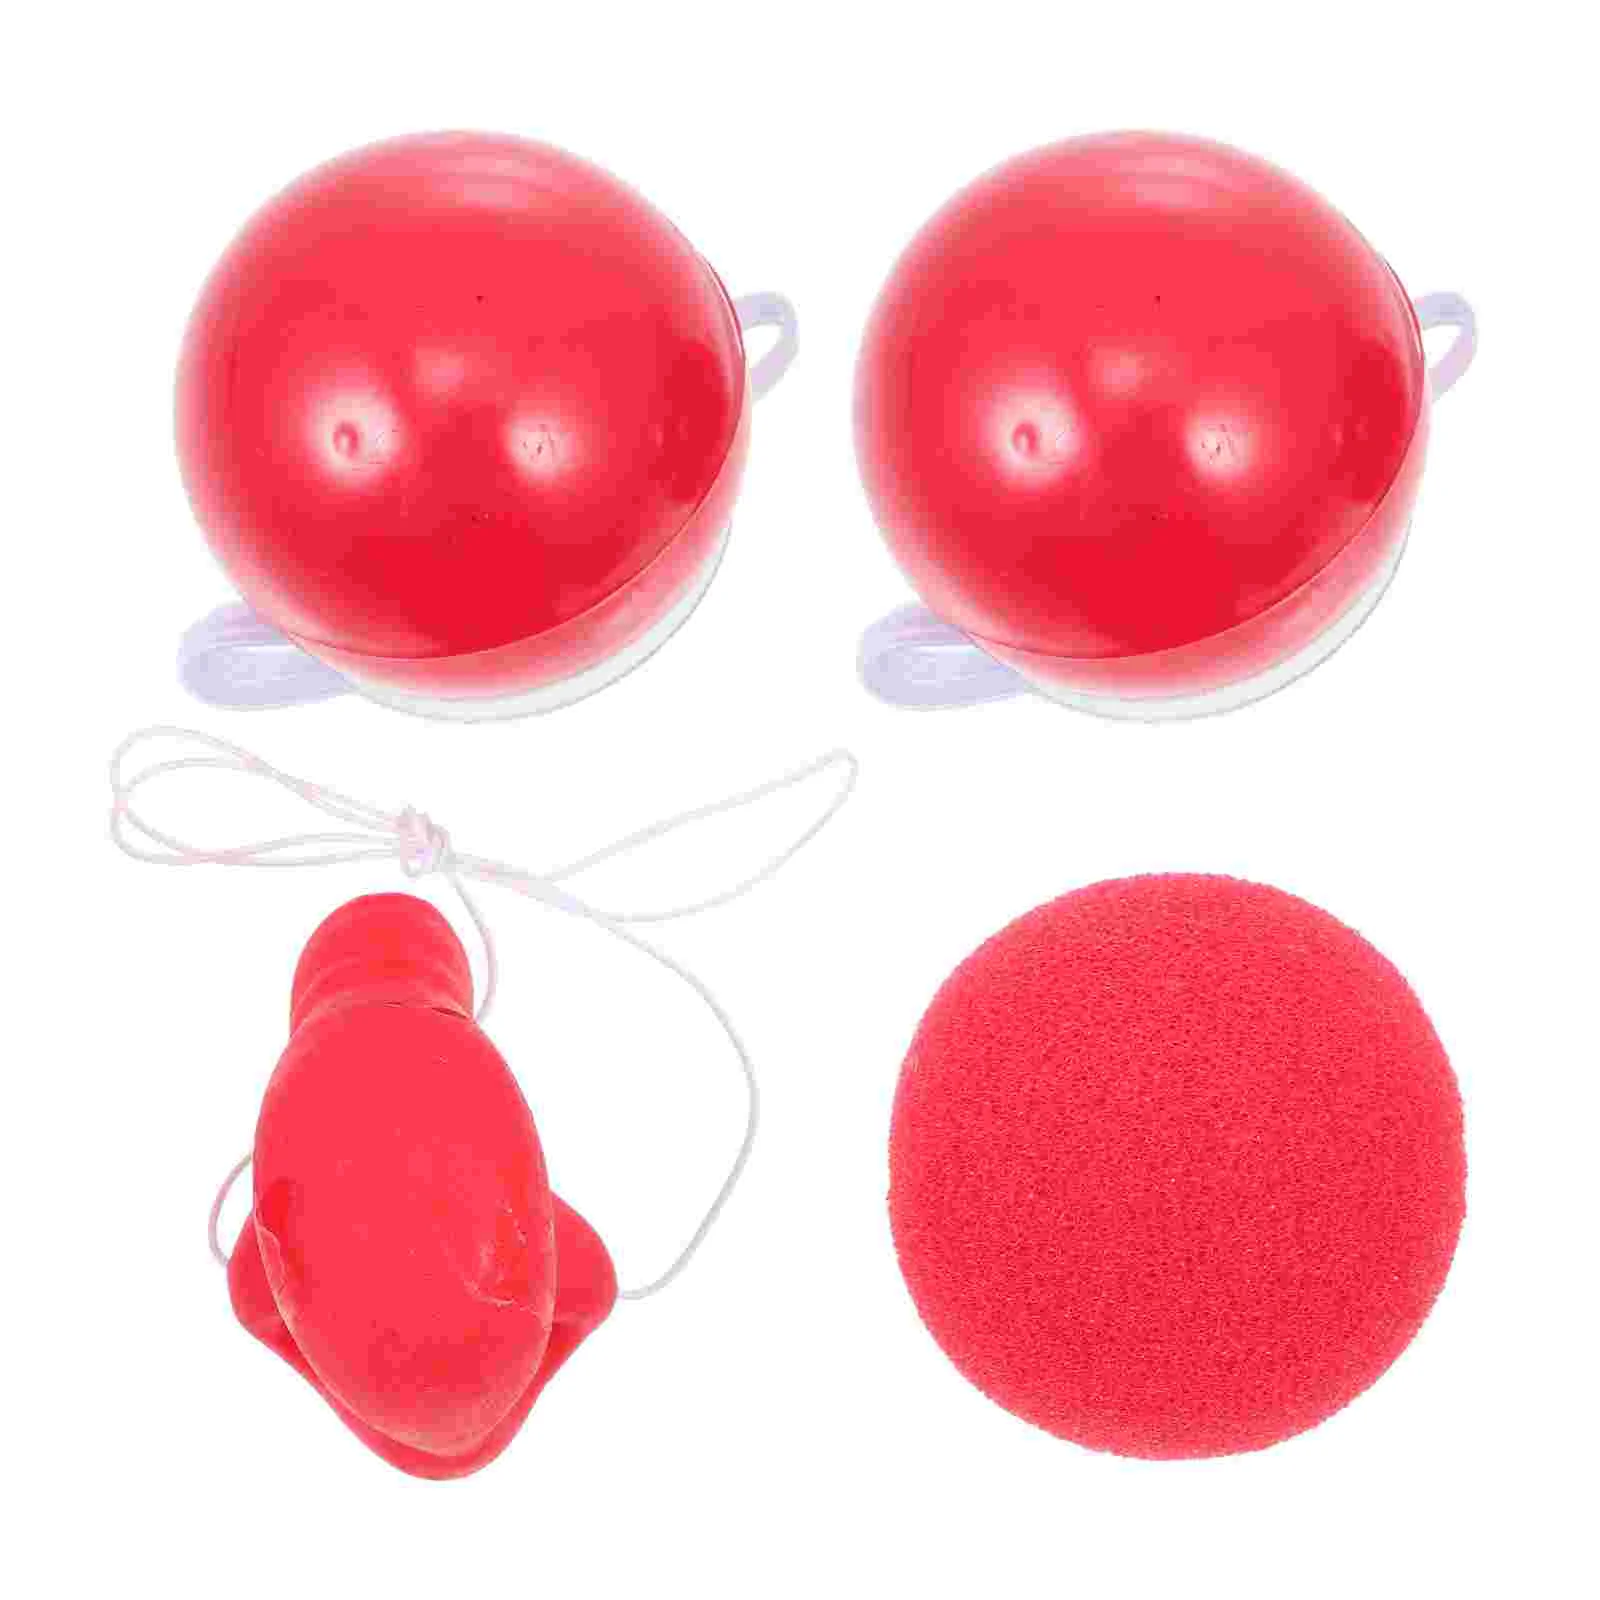 

Clown Noses Comedy Trick Props Halloween Masquerade Circus Props 1XSponge Clown Nose 1XRubber Nose 2X Glowing Clown Noses